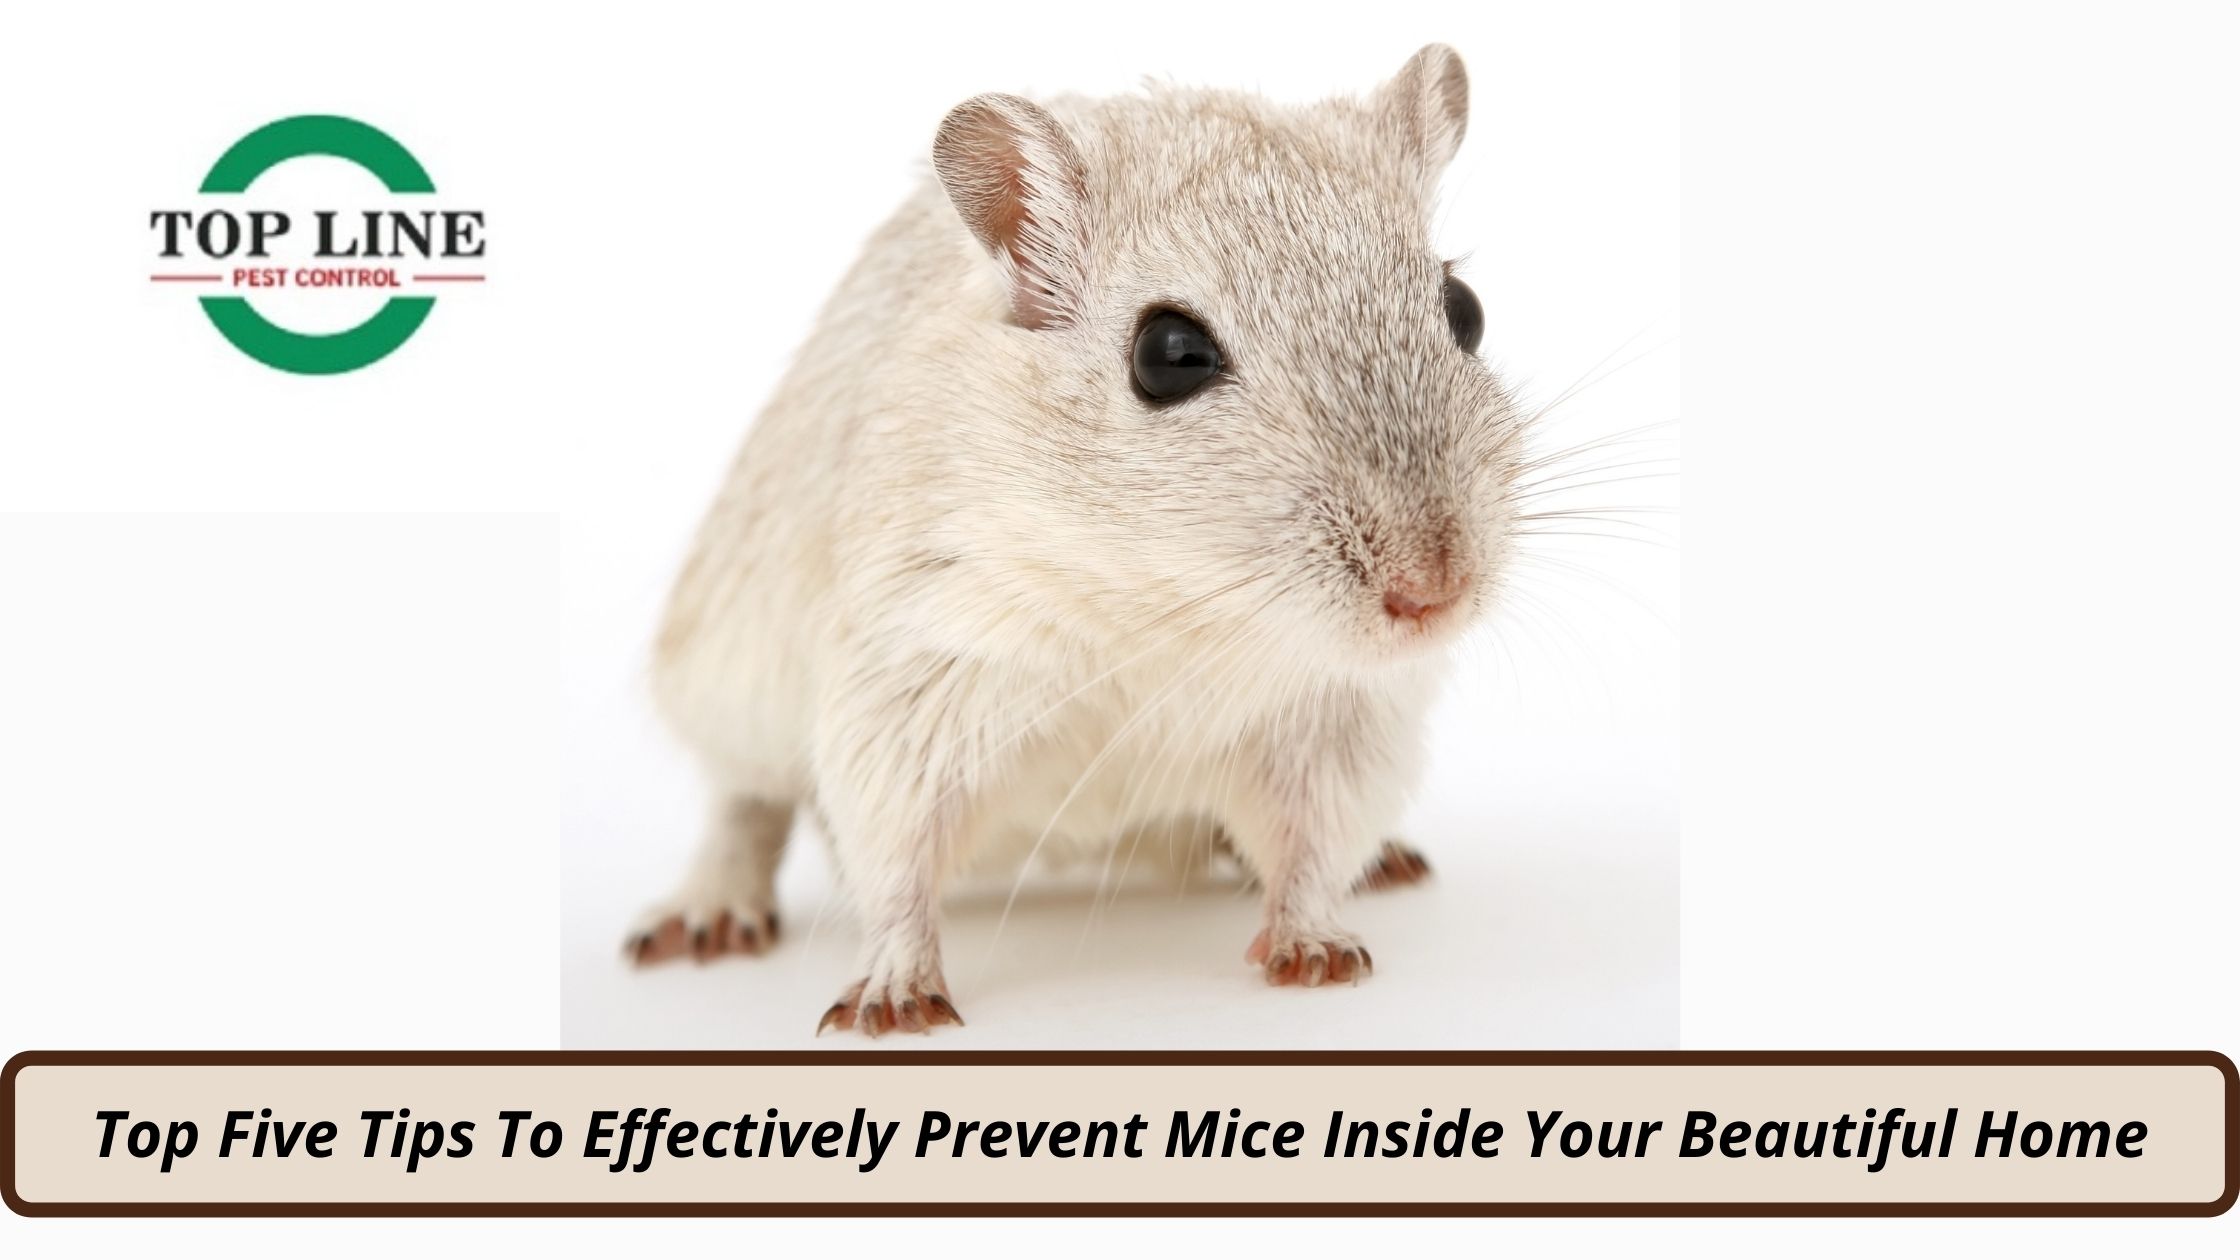 Top Five Tips To Effectively Prevent Mice Inside Your Beautiful Home